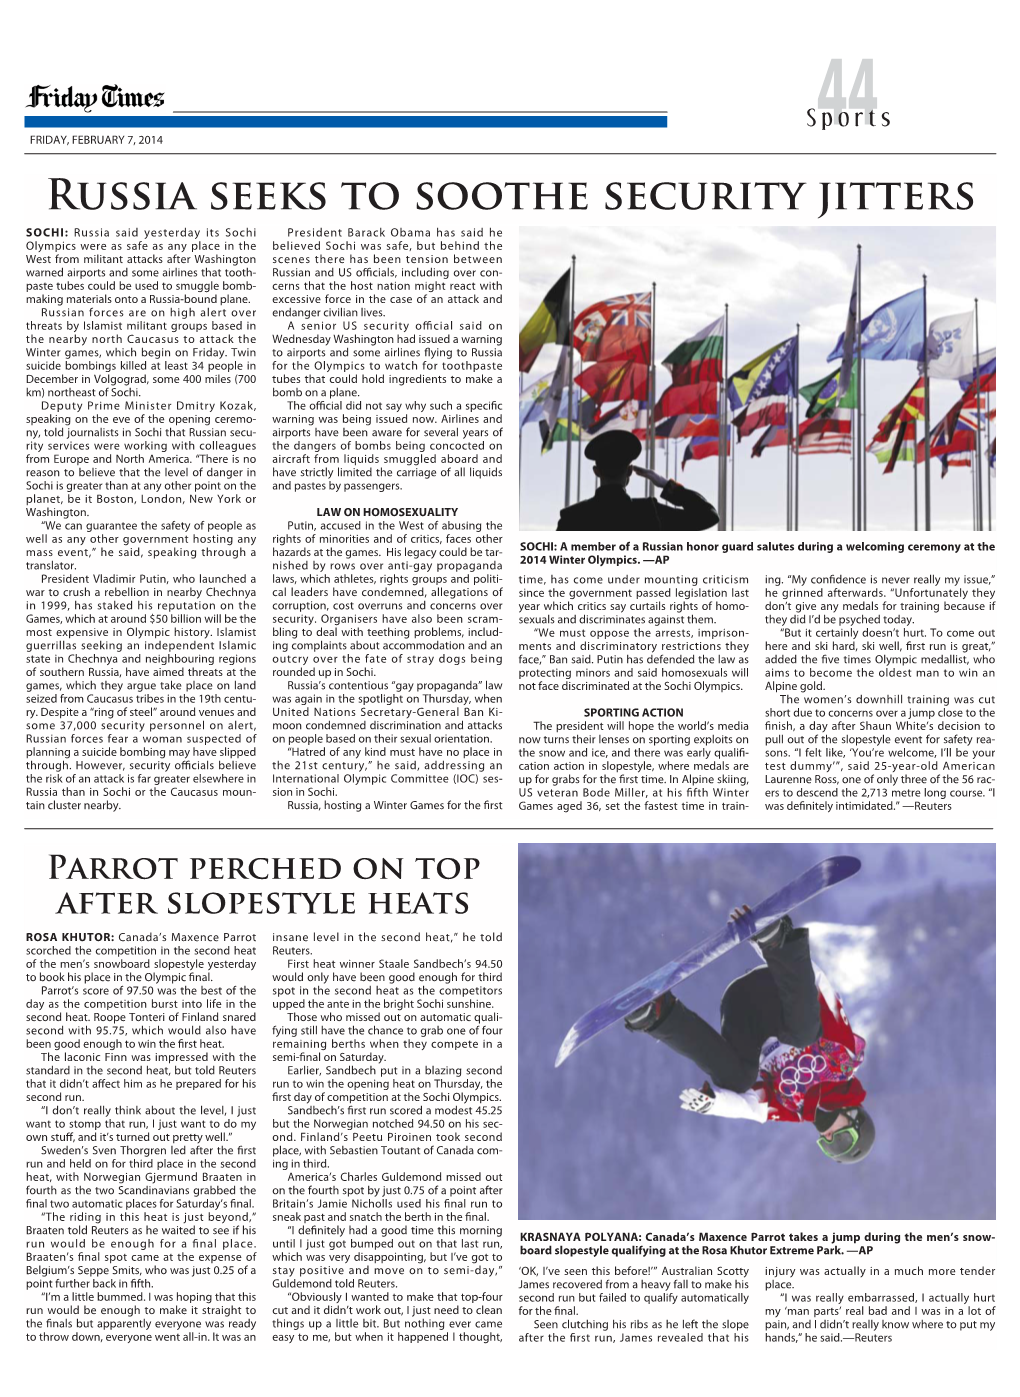 Russia Seeks to Soothe Security Jitters